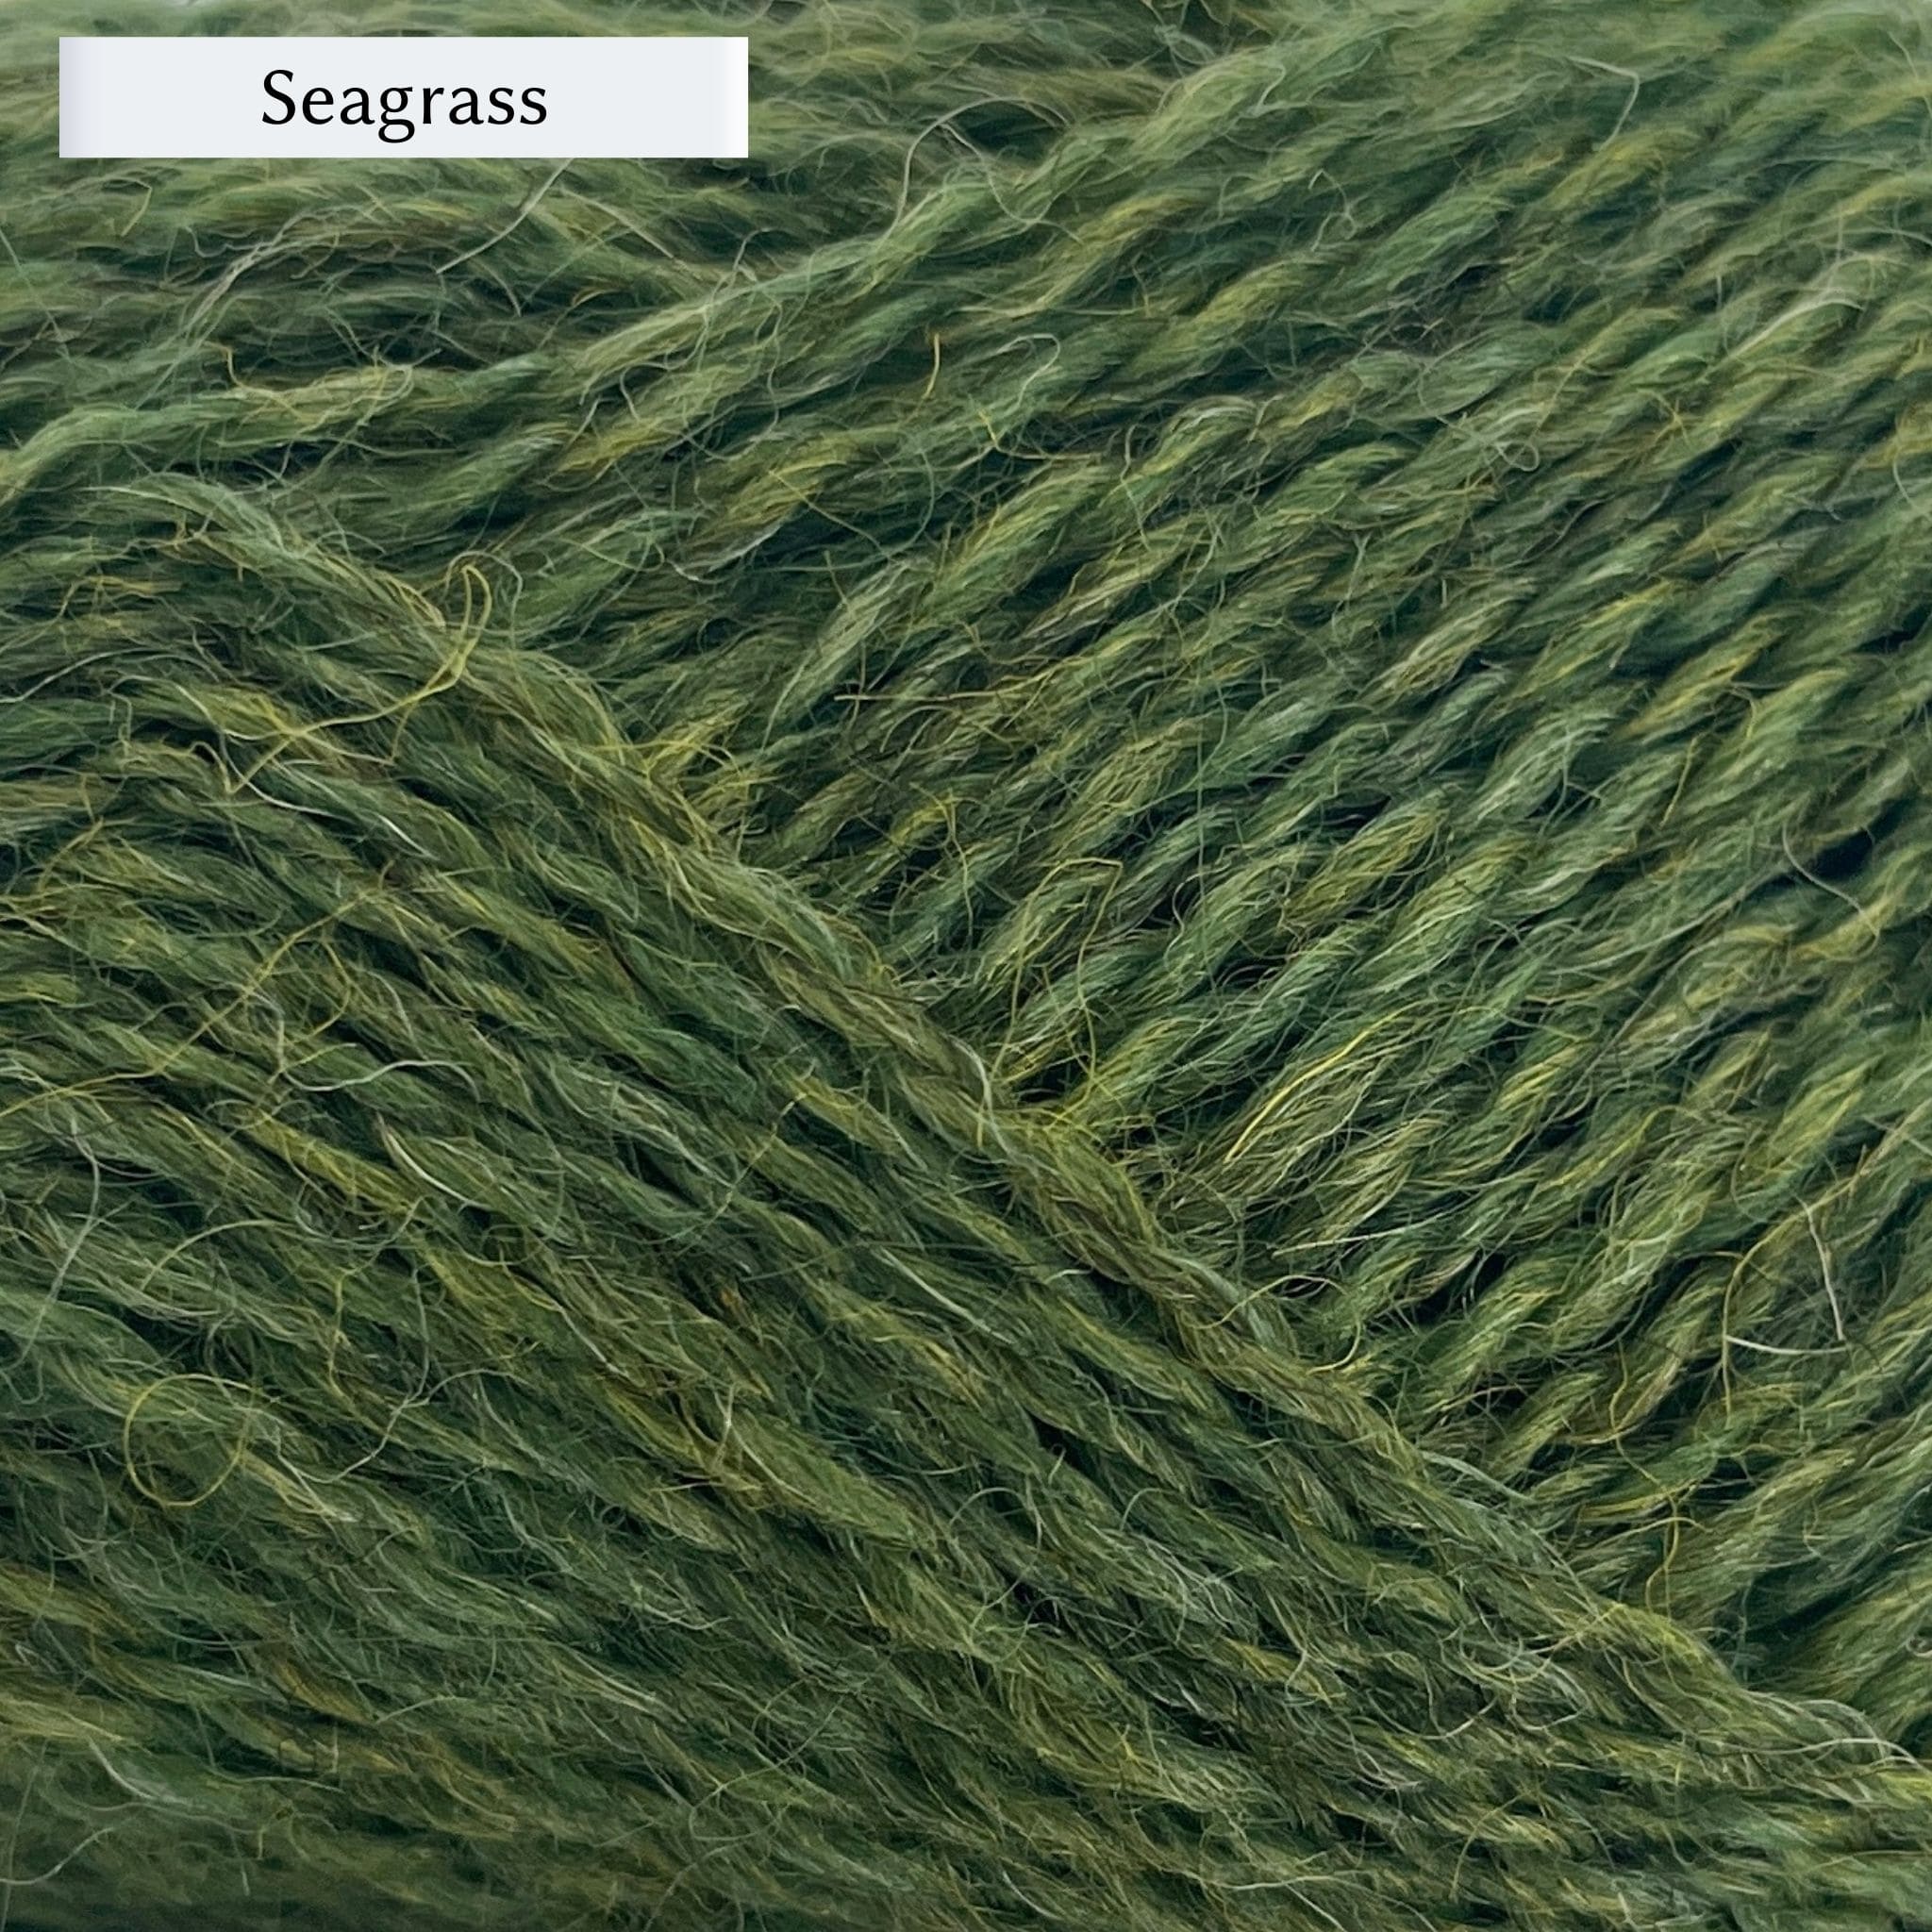 Marie Wallin's British Breeds yarn, a fingering weight, in color Seagrass, a grass green